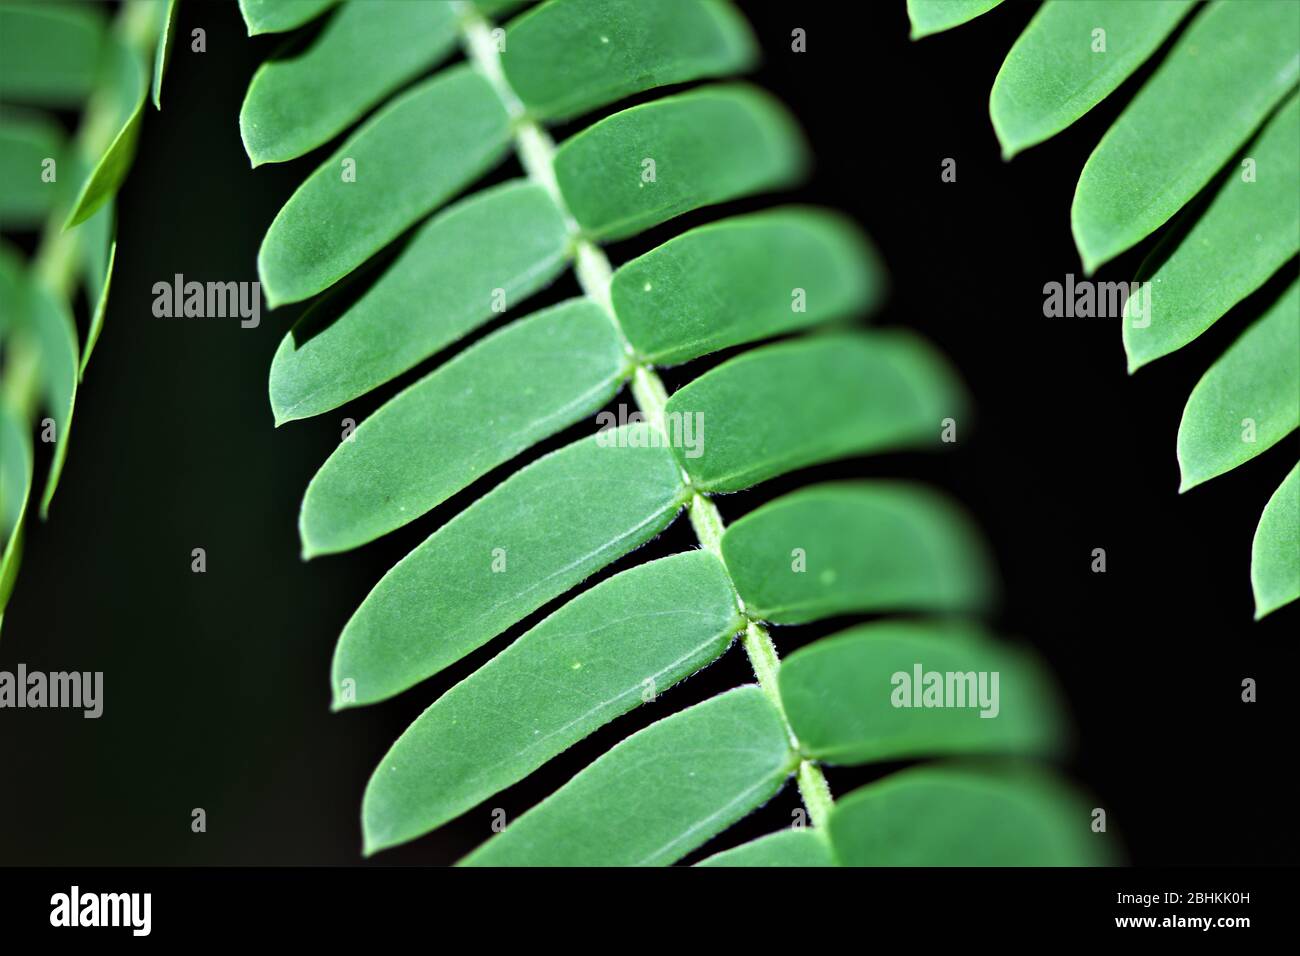 Branches of a fern tree. Stock Photo